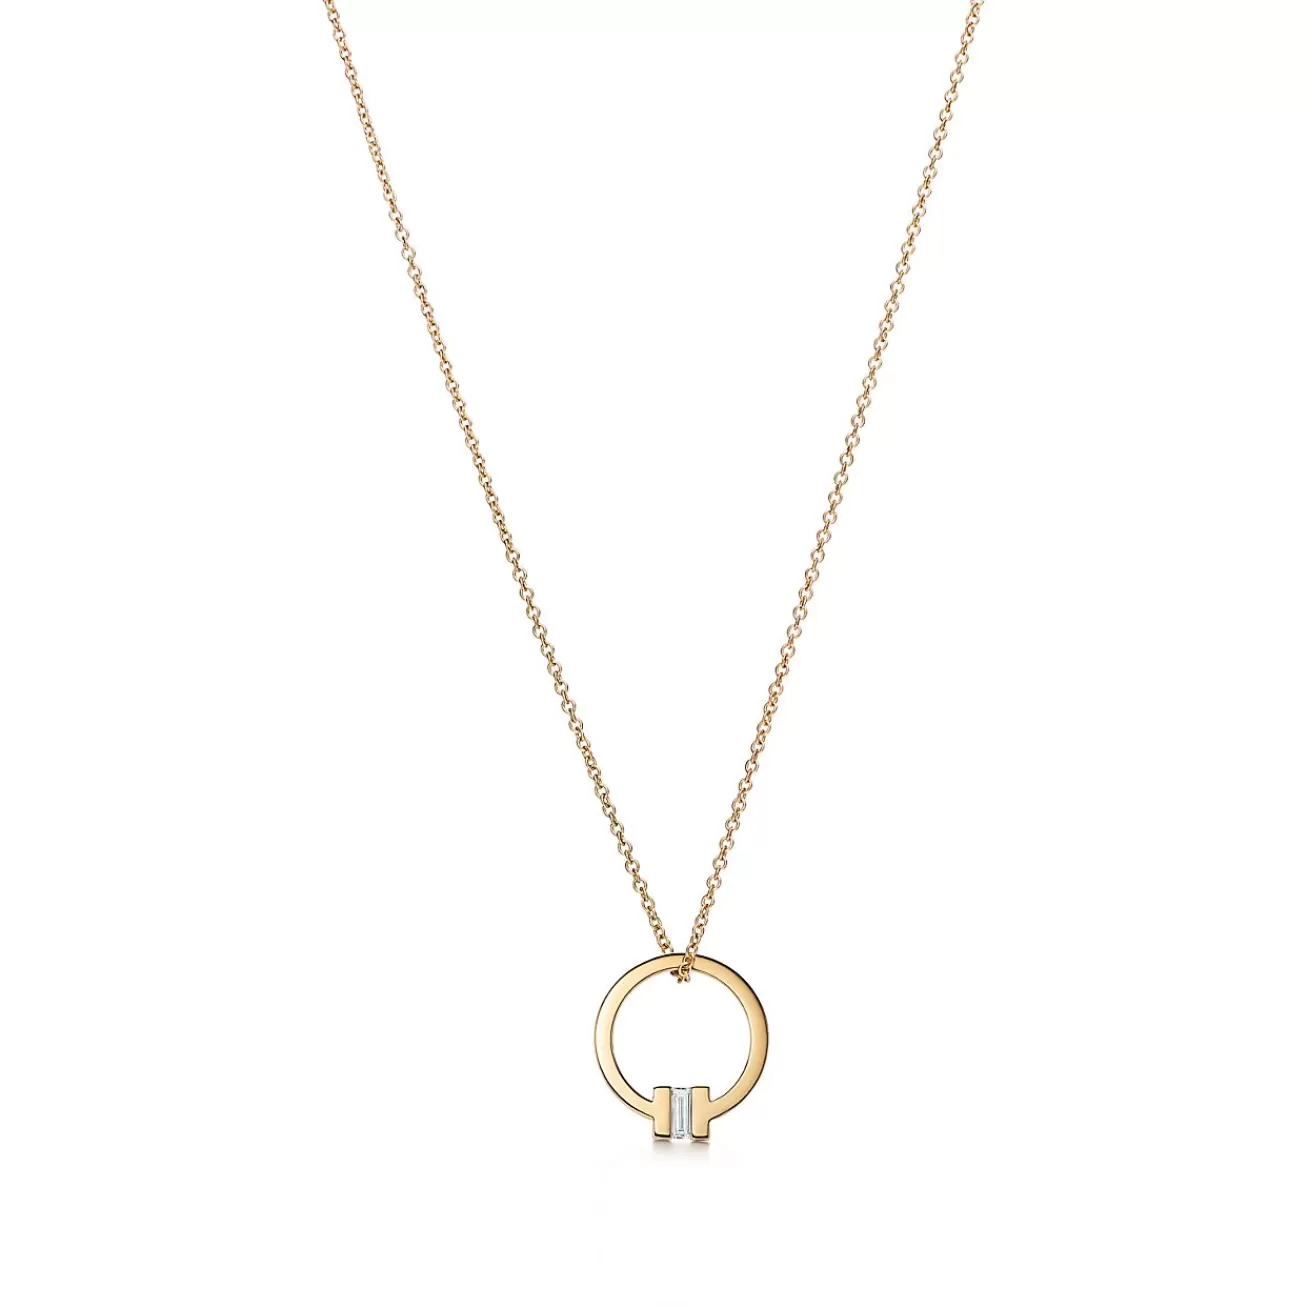 Tiffany & Co. Tiffany T pendant in 18k gold with a baguette diamond. | ^ Necklaces & Pendants | Men's Jewelry